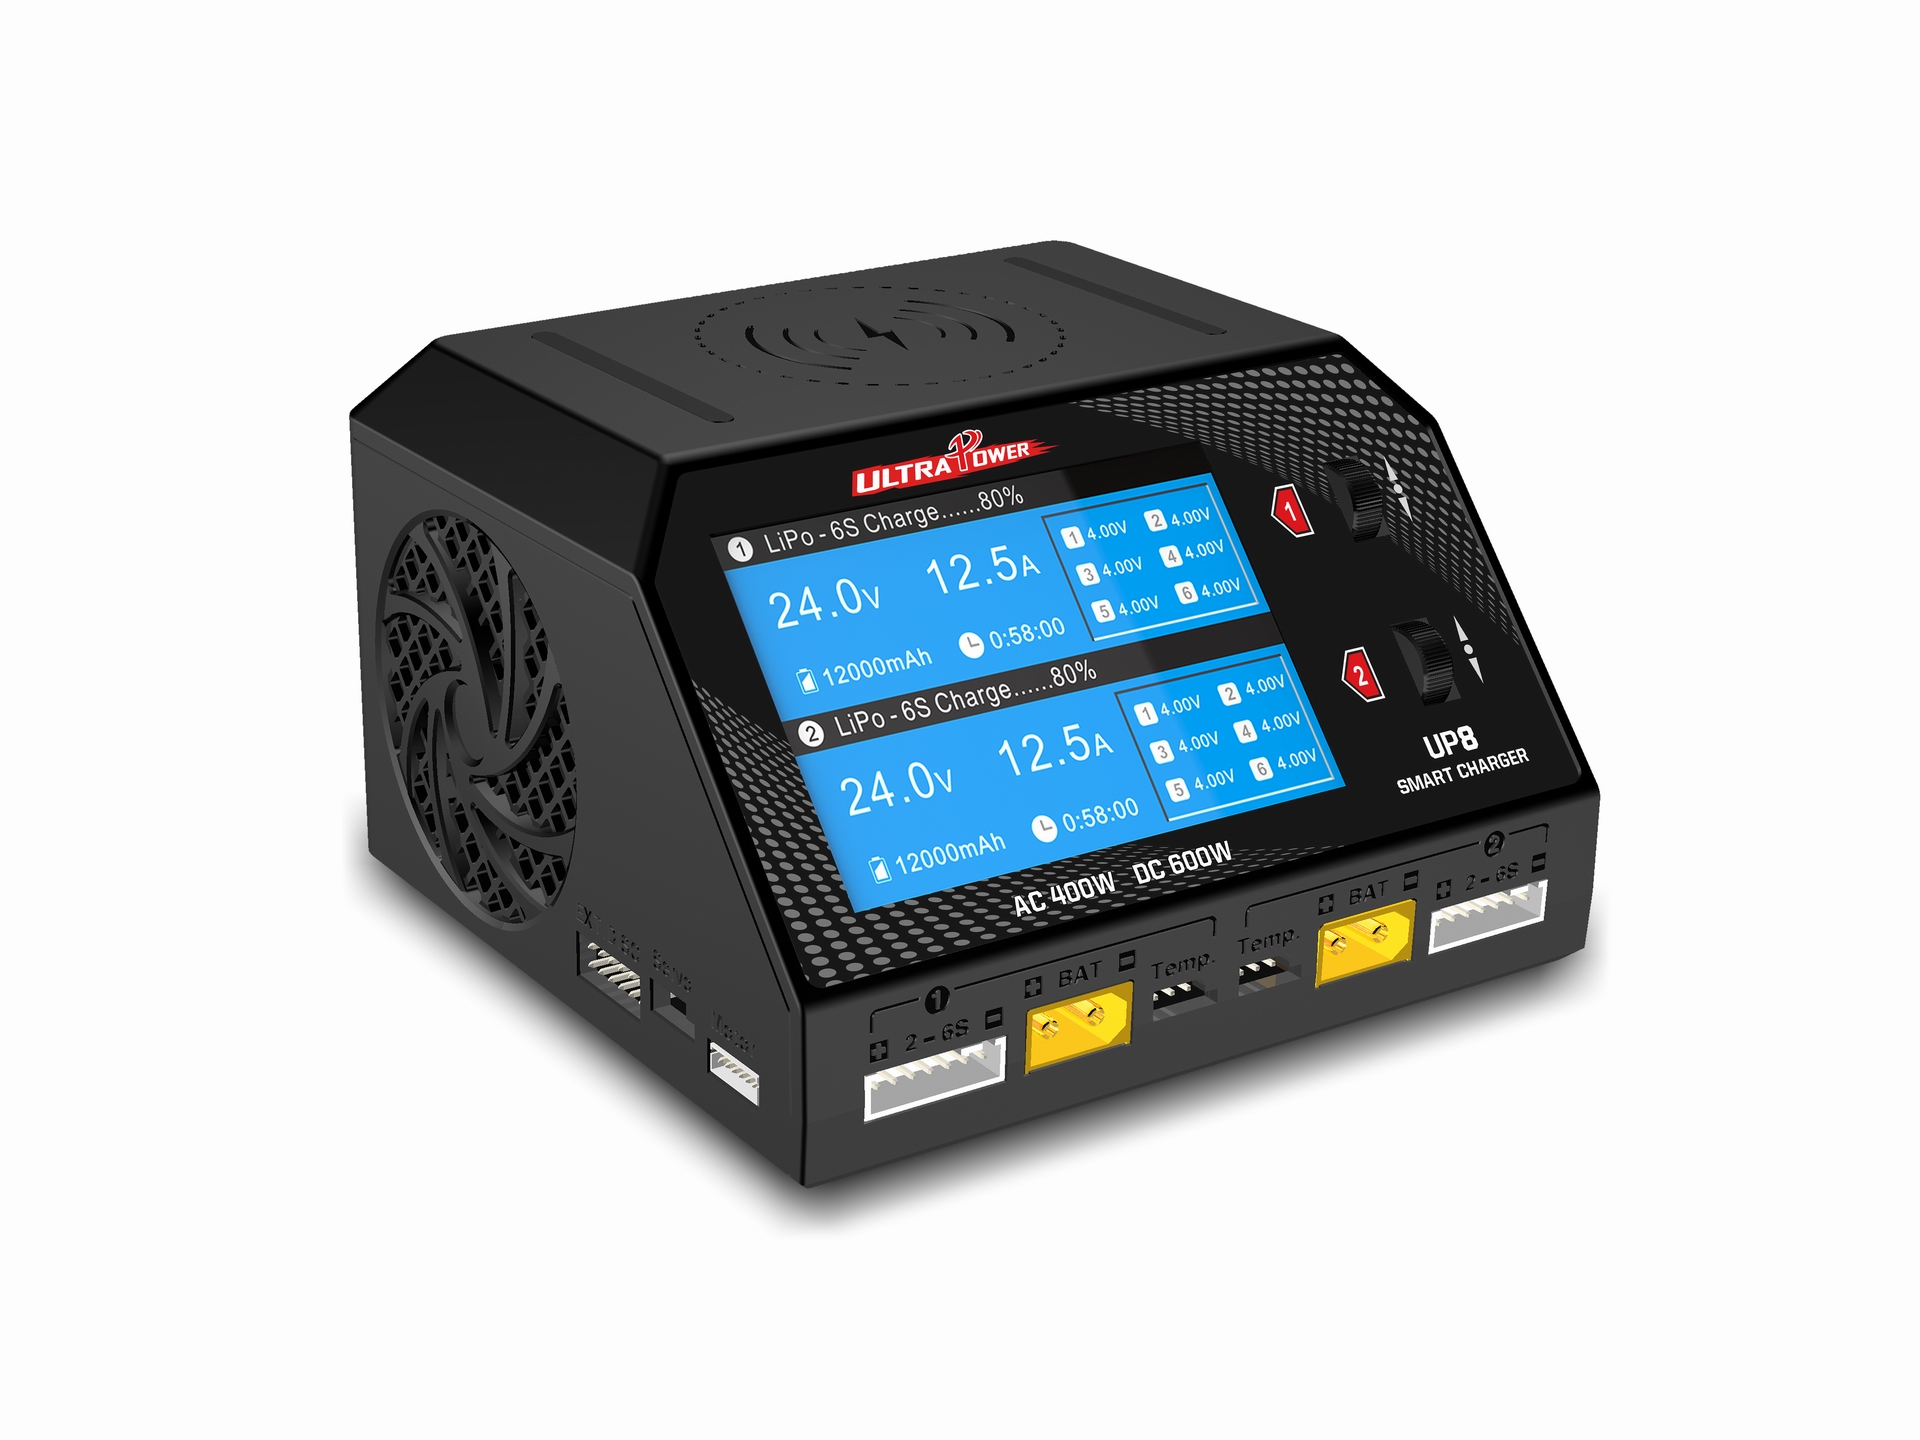 UP8 Balance Charger 600W